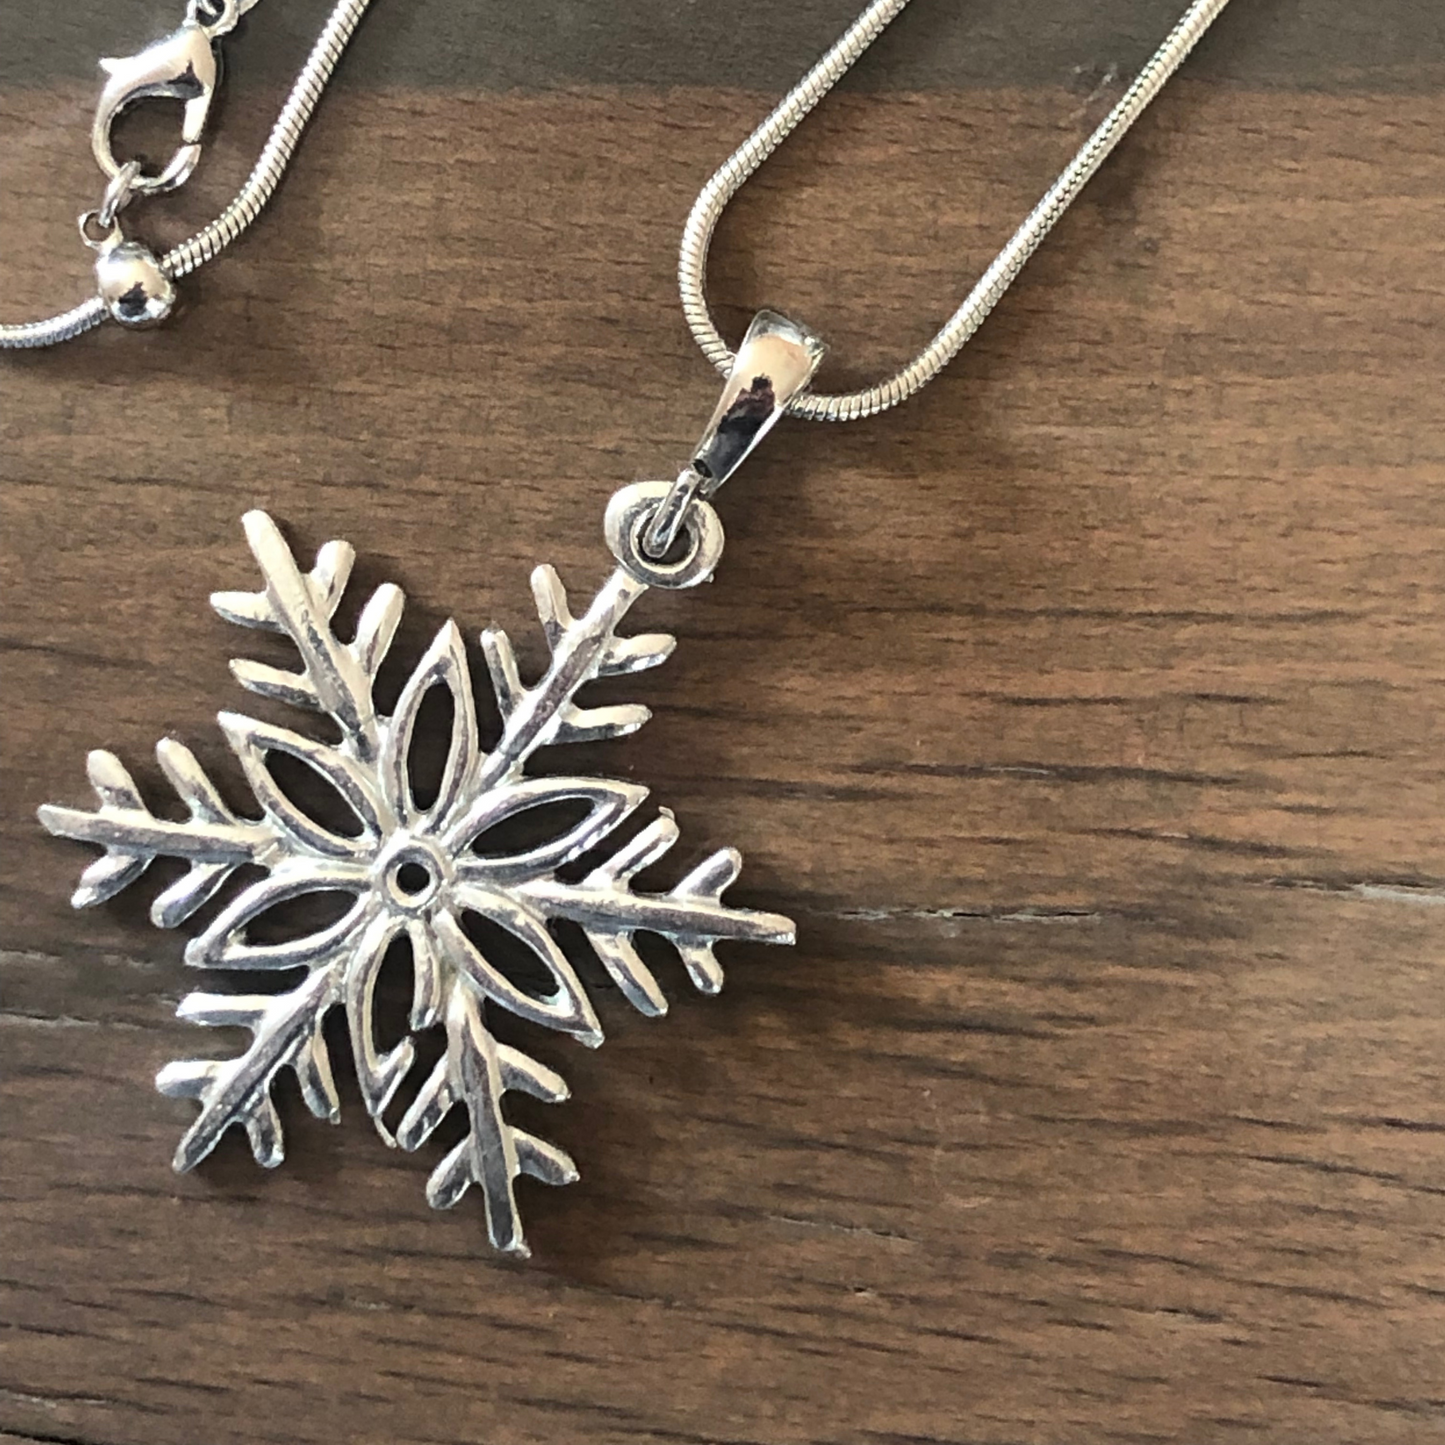 Small Pewter Snowflake Pendant with 26" Adjustable Rhodium Chain